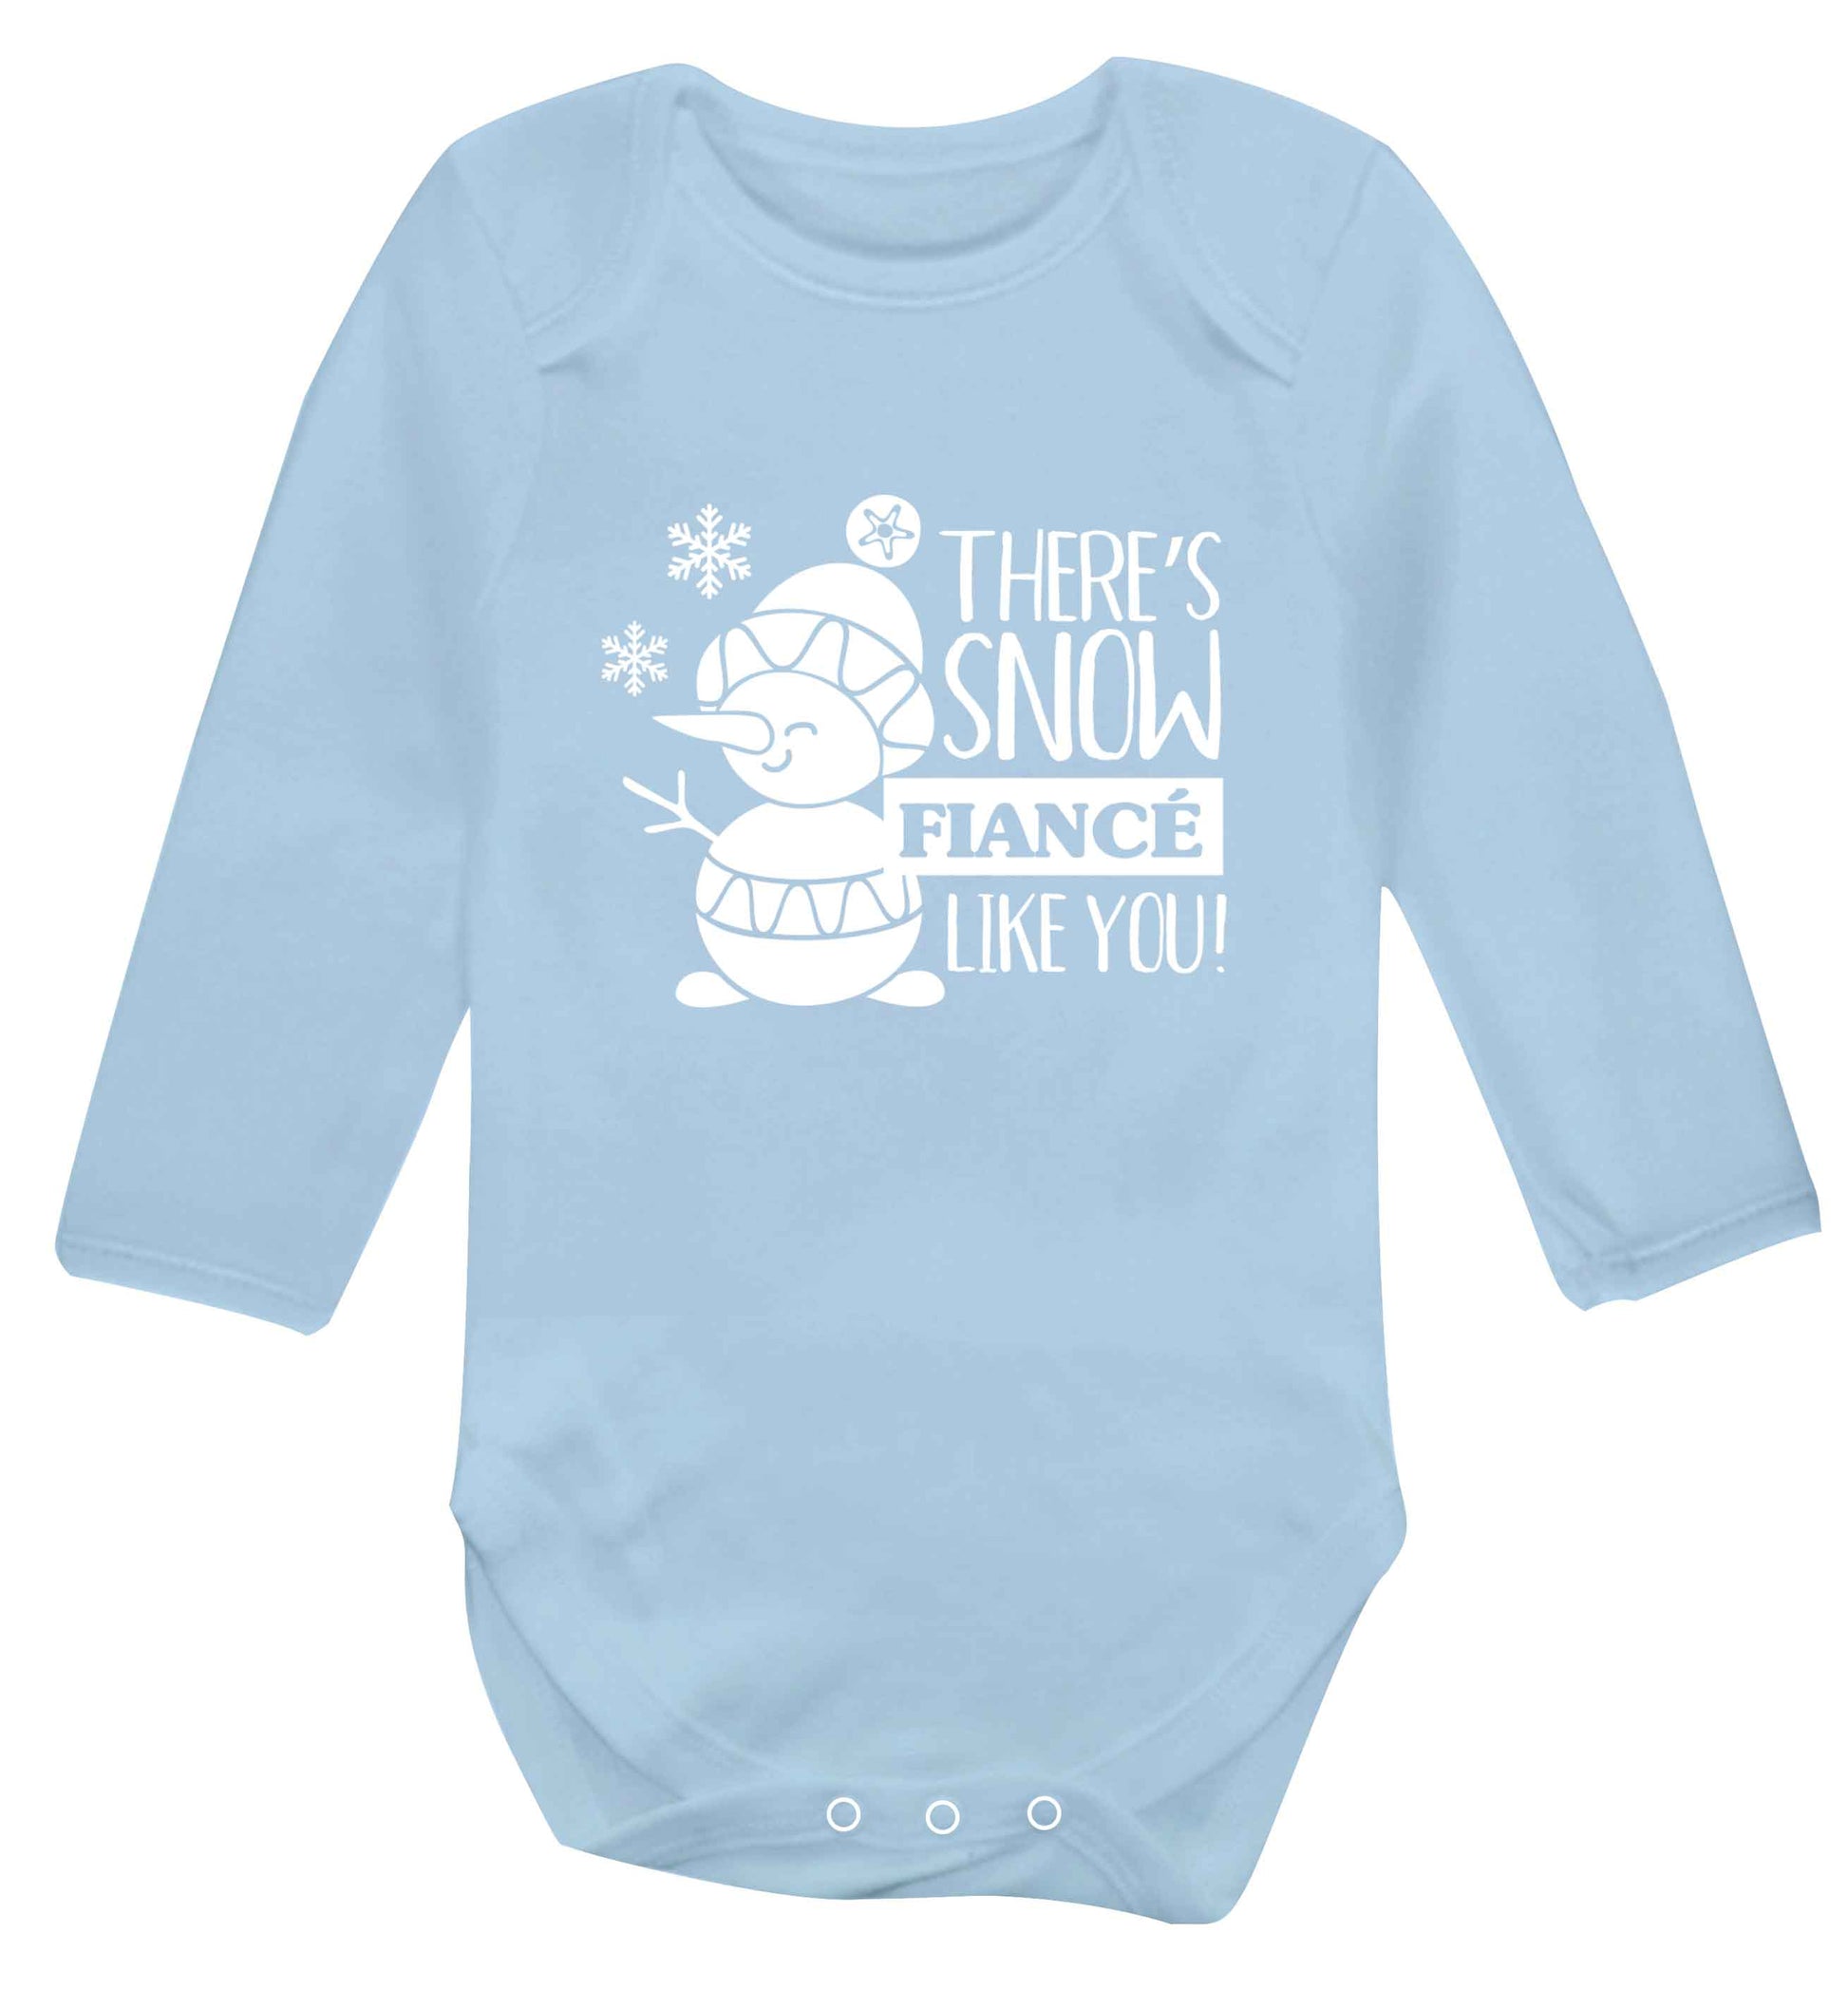 There's snow fiance like you baby vest long sleeved pale blue 6-12 months